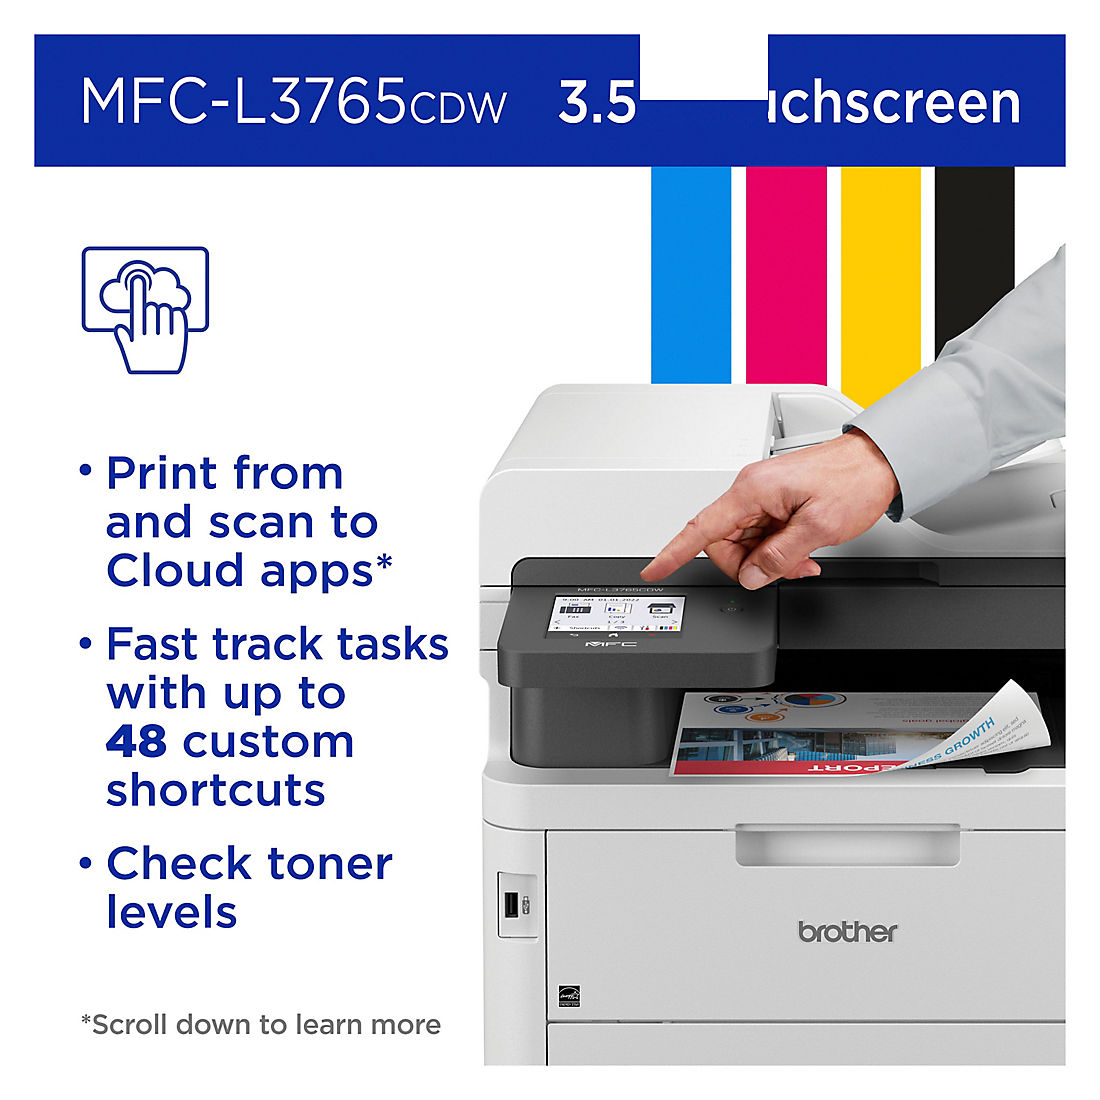  Brother MFC-L3750CDW Digital Color All-in-One Printer